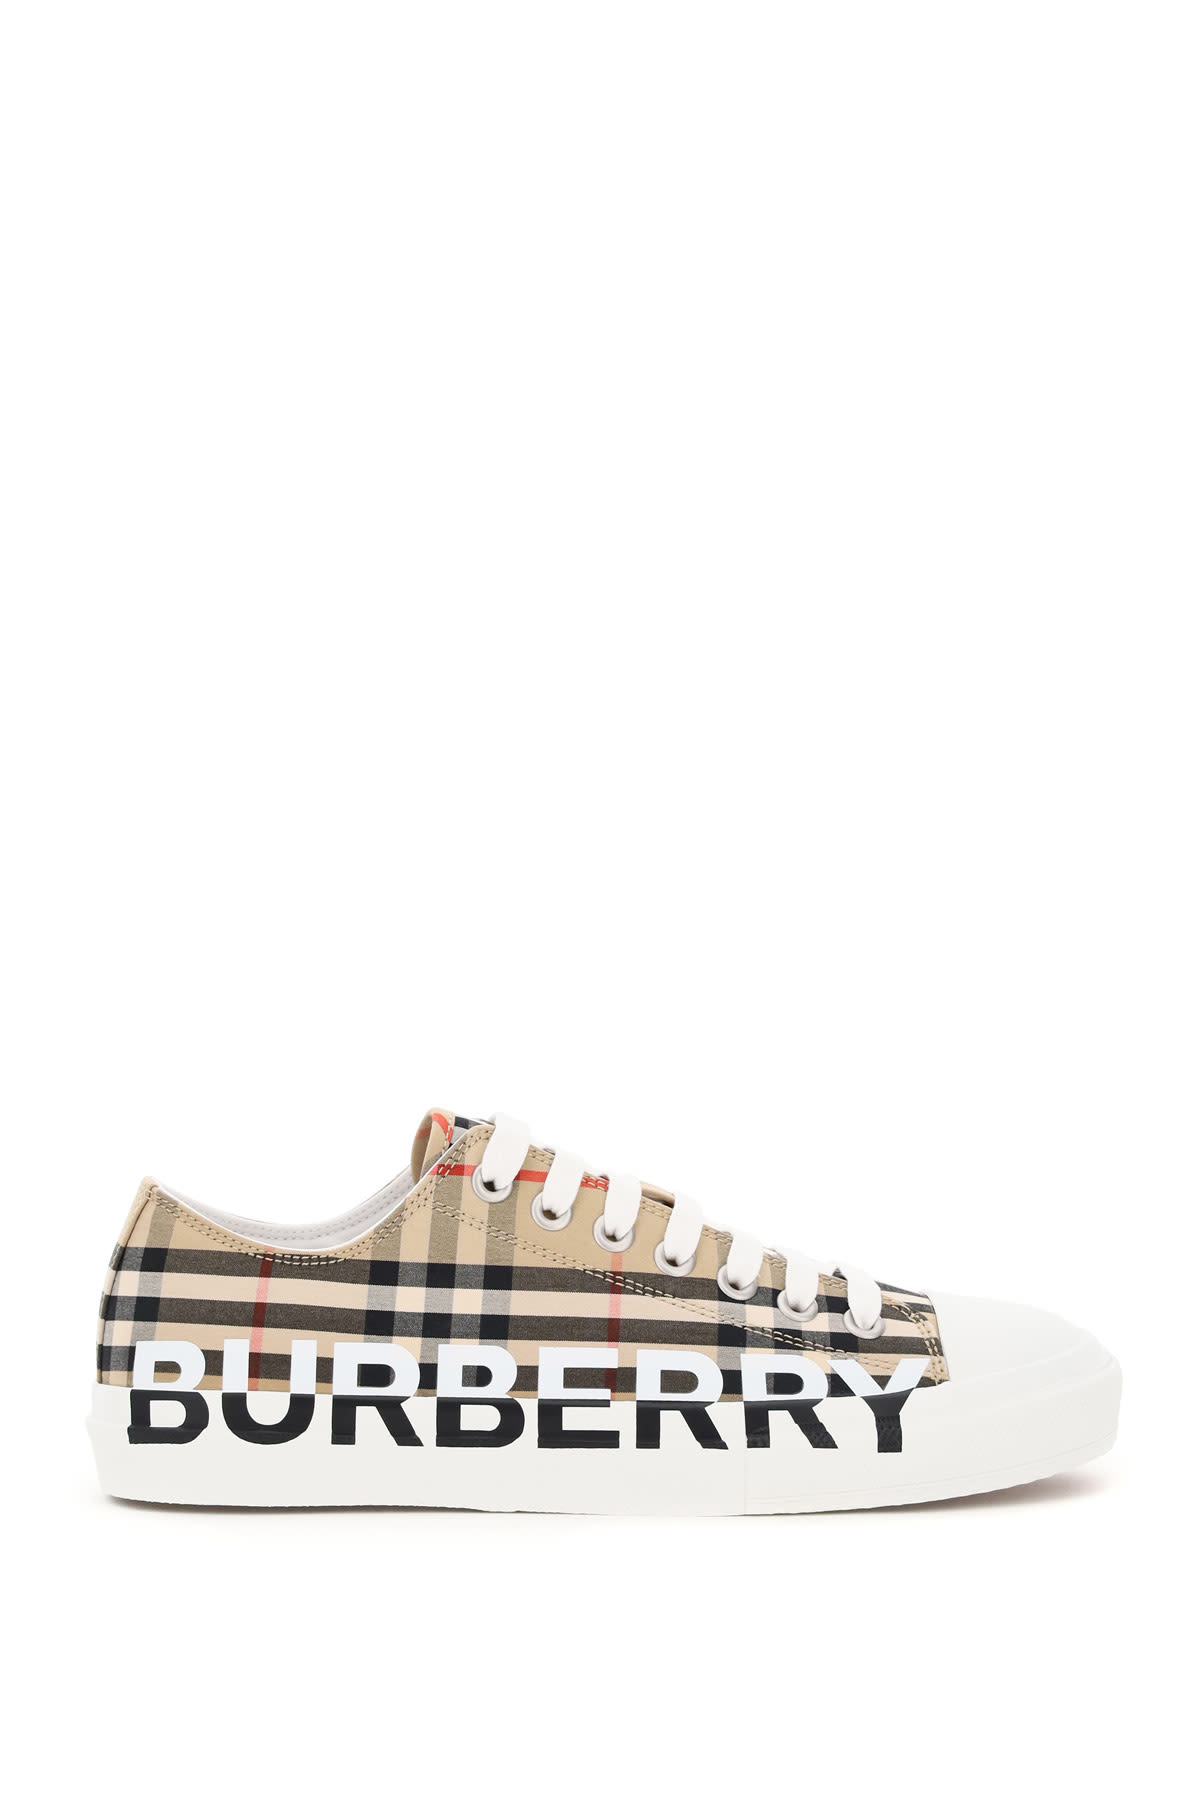 Burberry Larkhall Check Sneakers